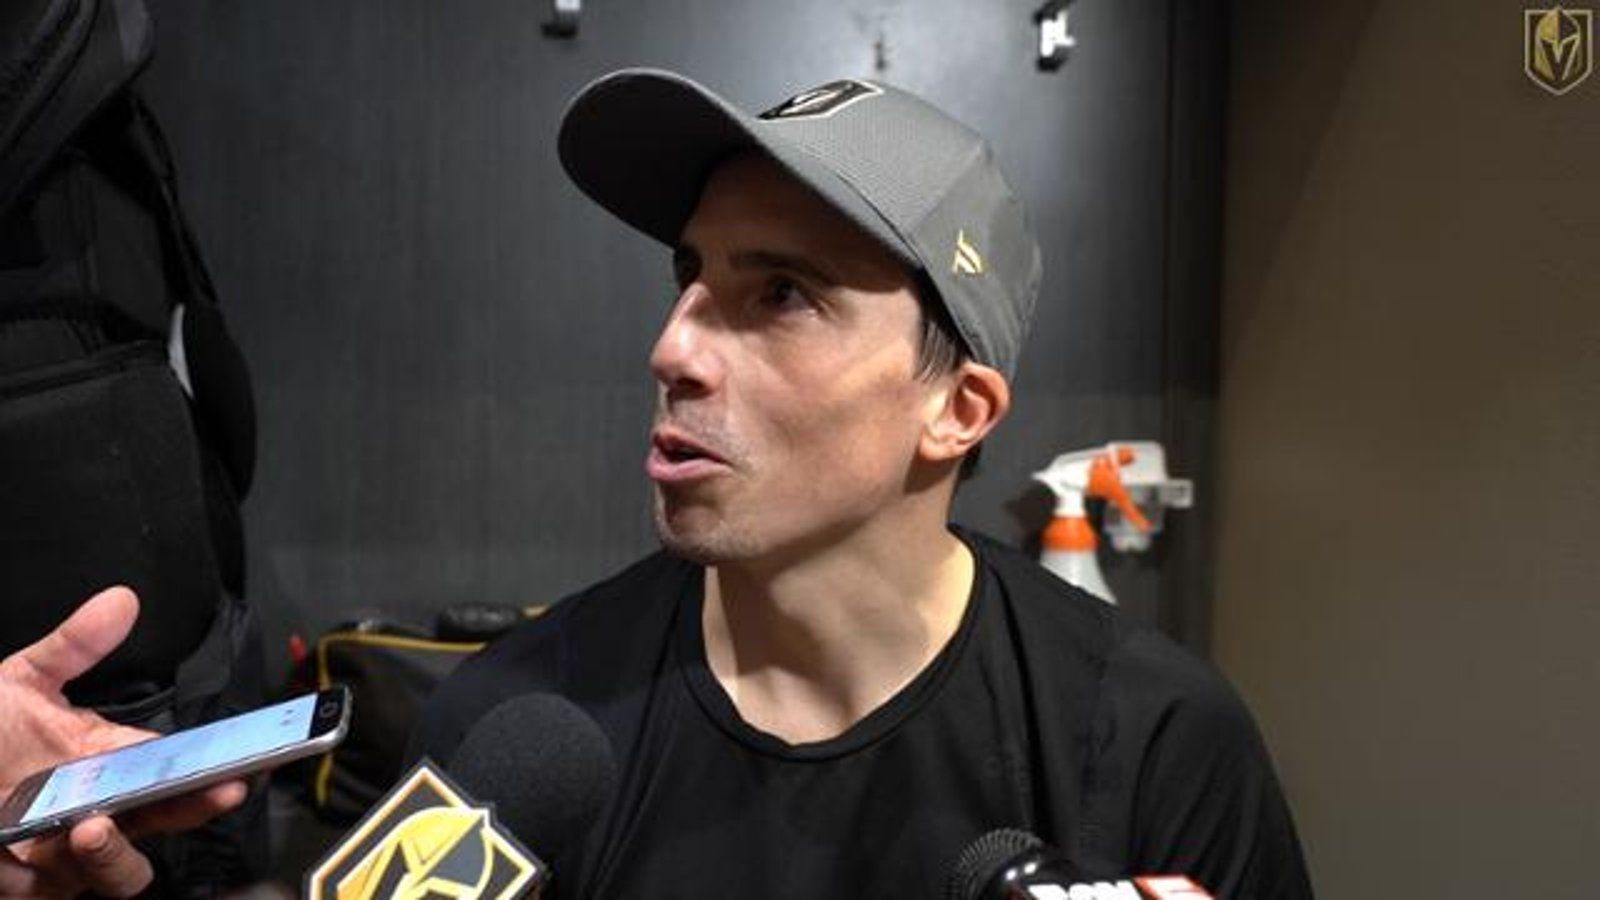 Fleury lives most emotional moment of his career on Tuesday night